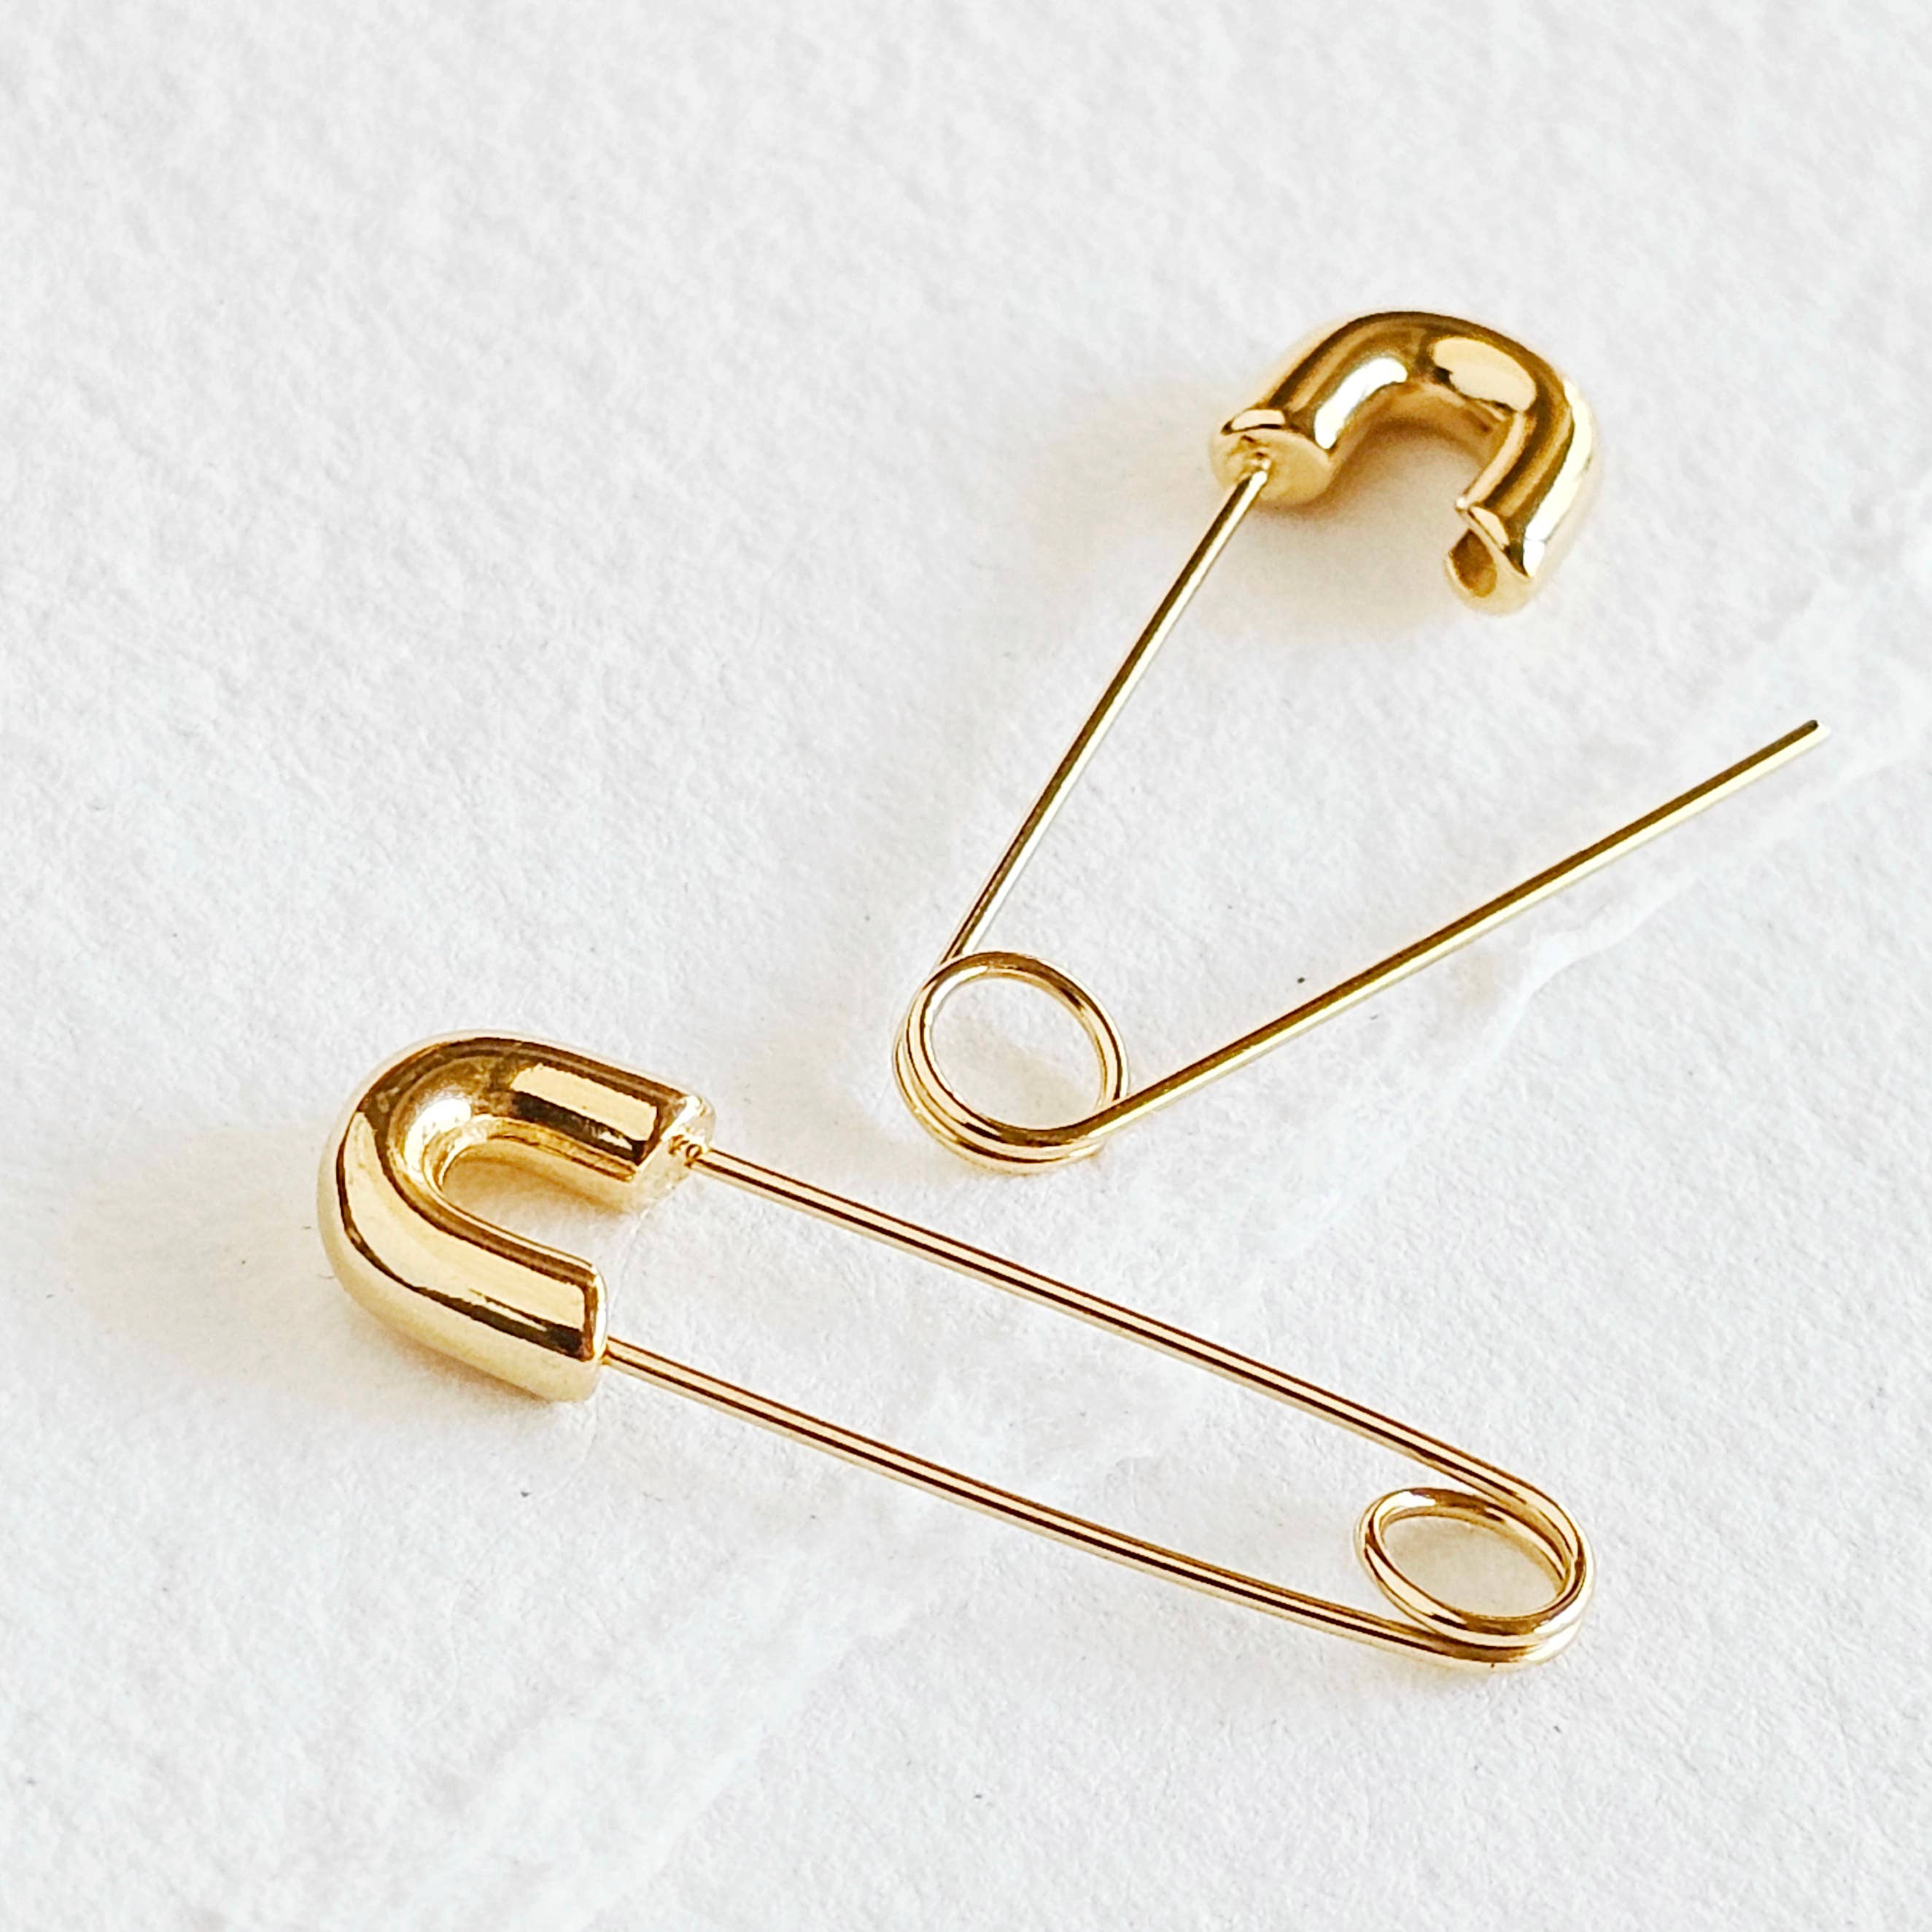 Safety Pin Earrings - White Gold